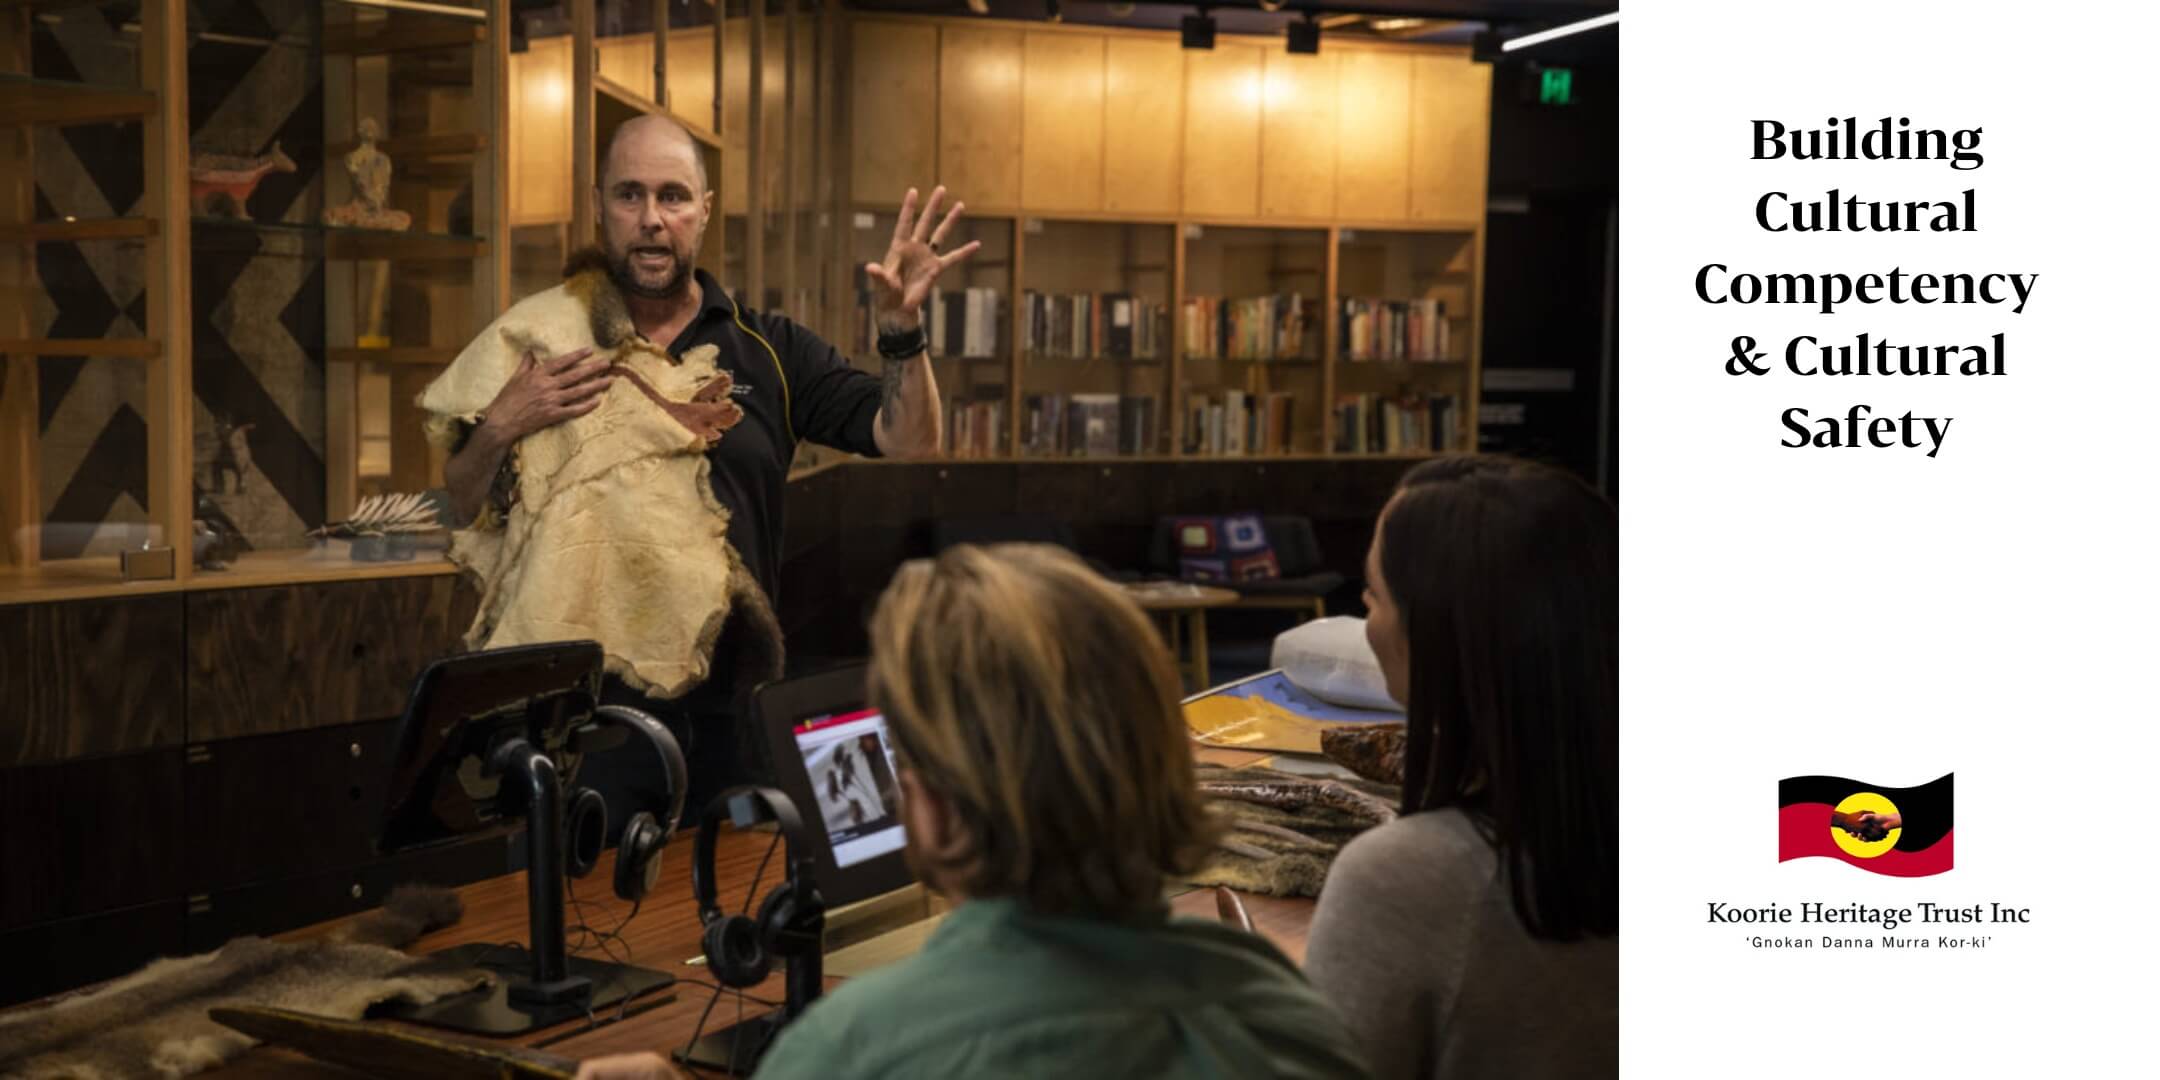 In a photo on the left of this banner a man holding a possum skin is talking to a class of people in a dimly lit library or museum. He is holding his hand up as though he is gesticulating, explaining or emphasising a point. On the right are the words “Building Cultural Competency and Cultural Safety” and the logo for Koorie Heritage Trust inc - ‘Gnomon Danna Murray Kor-ki’